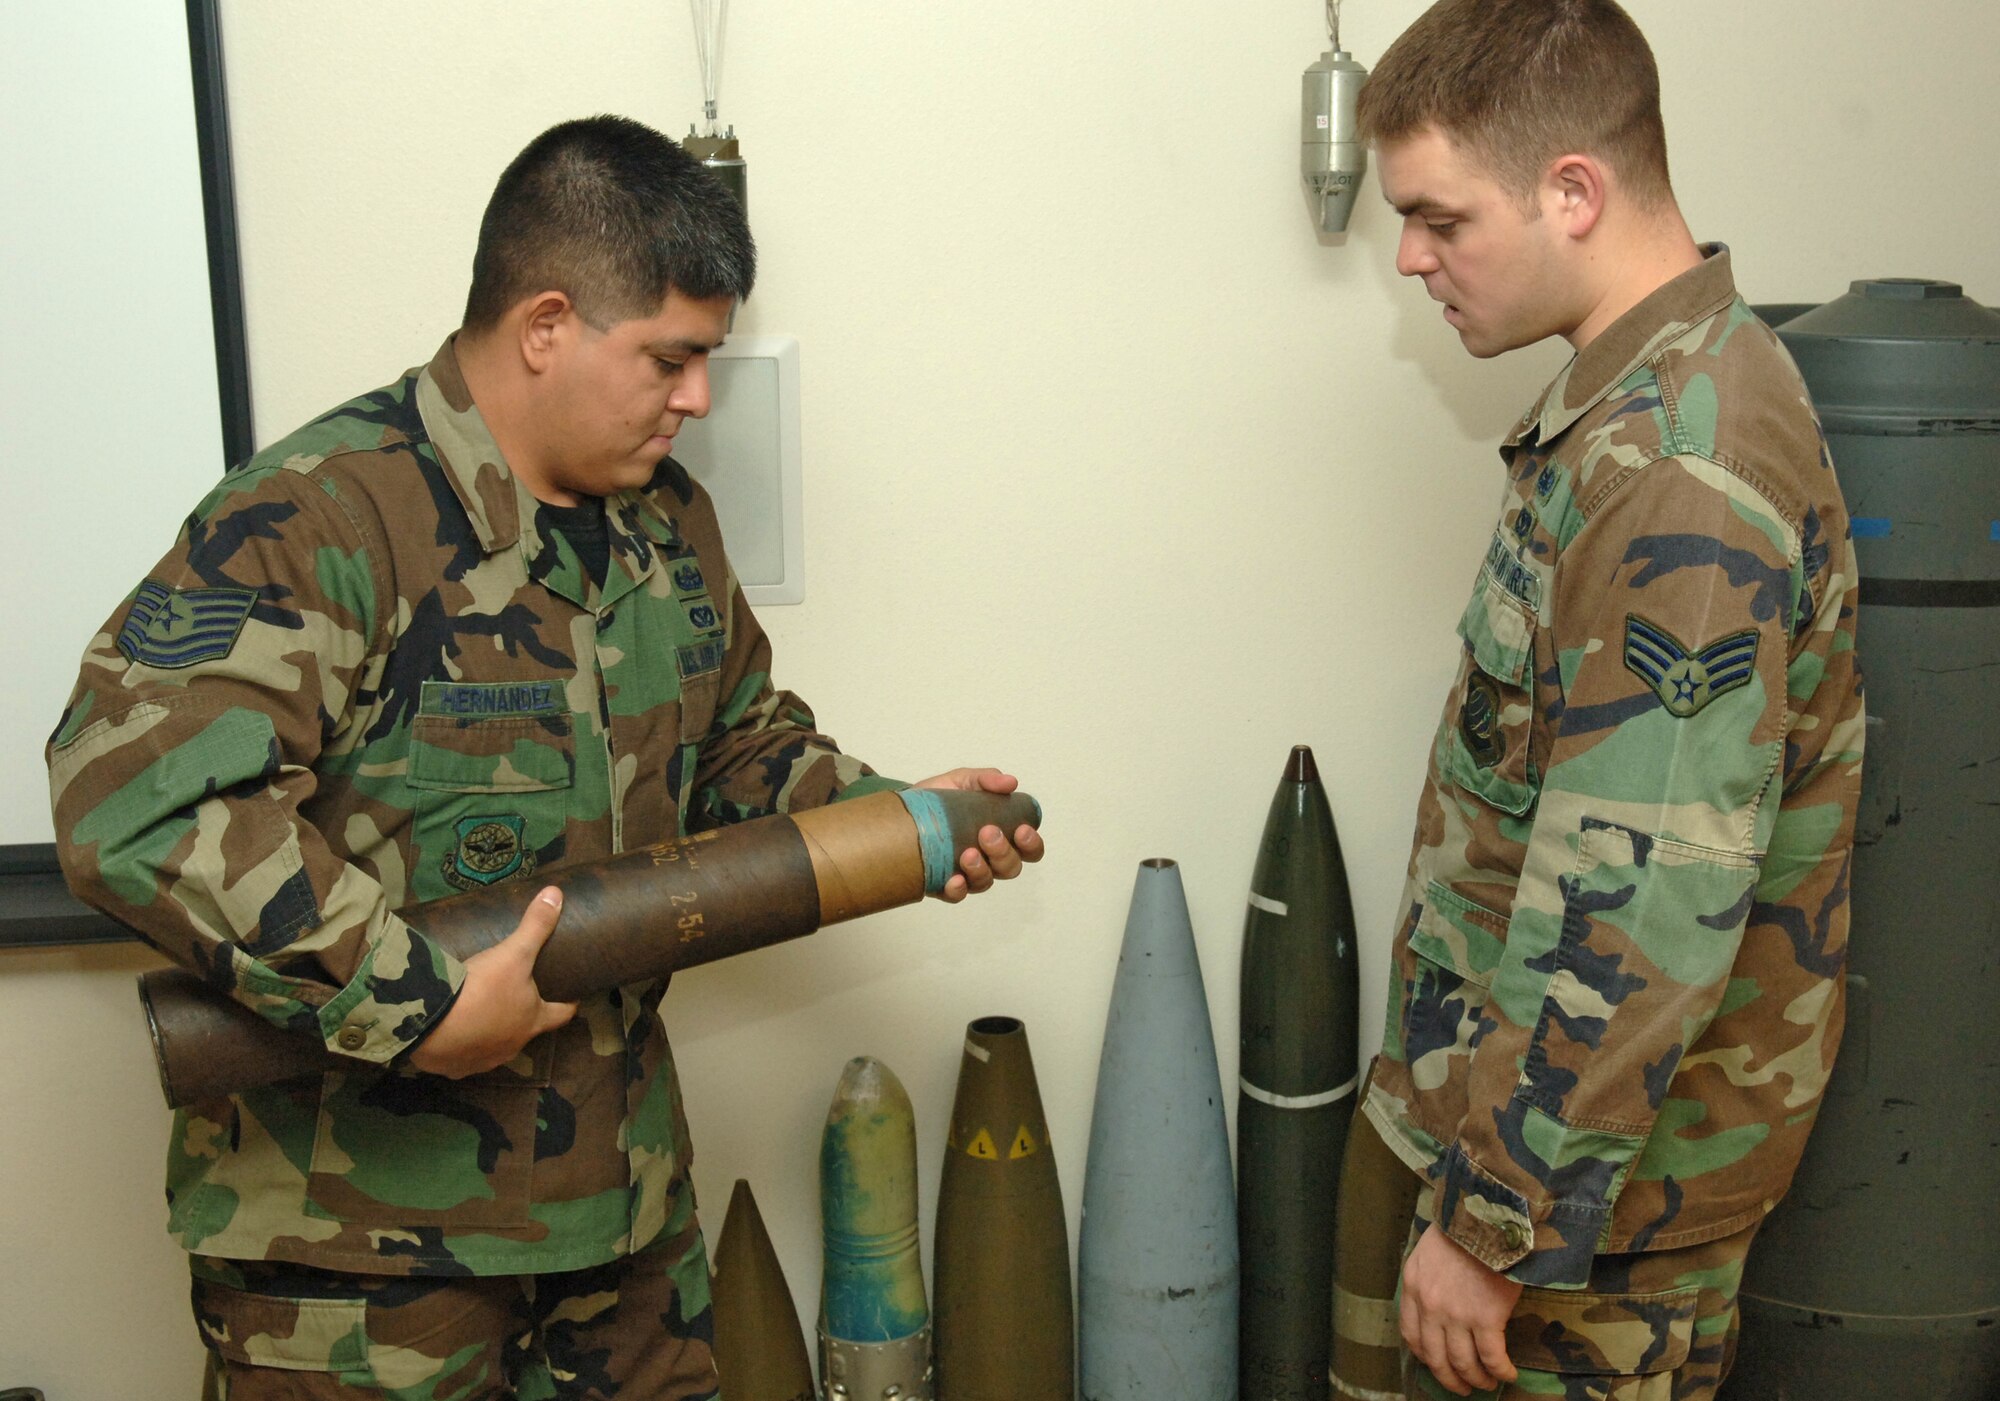 FAIRCHILD AIR FORCE BASE, Wash. -- Tech. Sgt. Jesus Hernandez and Senior Airman Amos Smith of the 92nd Civil Engineer Squadron Explosive Ordinance Disposal team show off a 3.5 inch Korean War era practice bazooka rocket Tuesday. Sergeant Hernandez received a Bronze star and Airman Smith received an Army Commendation Medal with valor device. (U.S. Air Force photo/Senior Airman Jessica Fuentez)